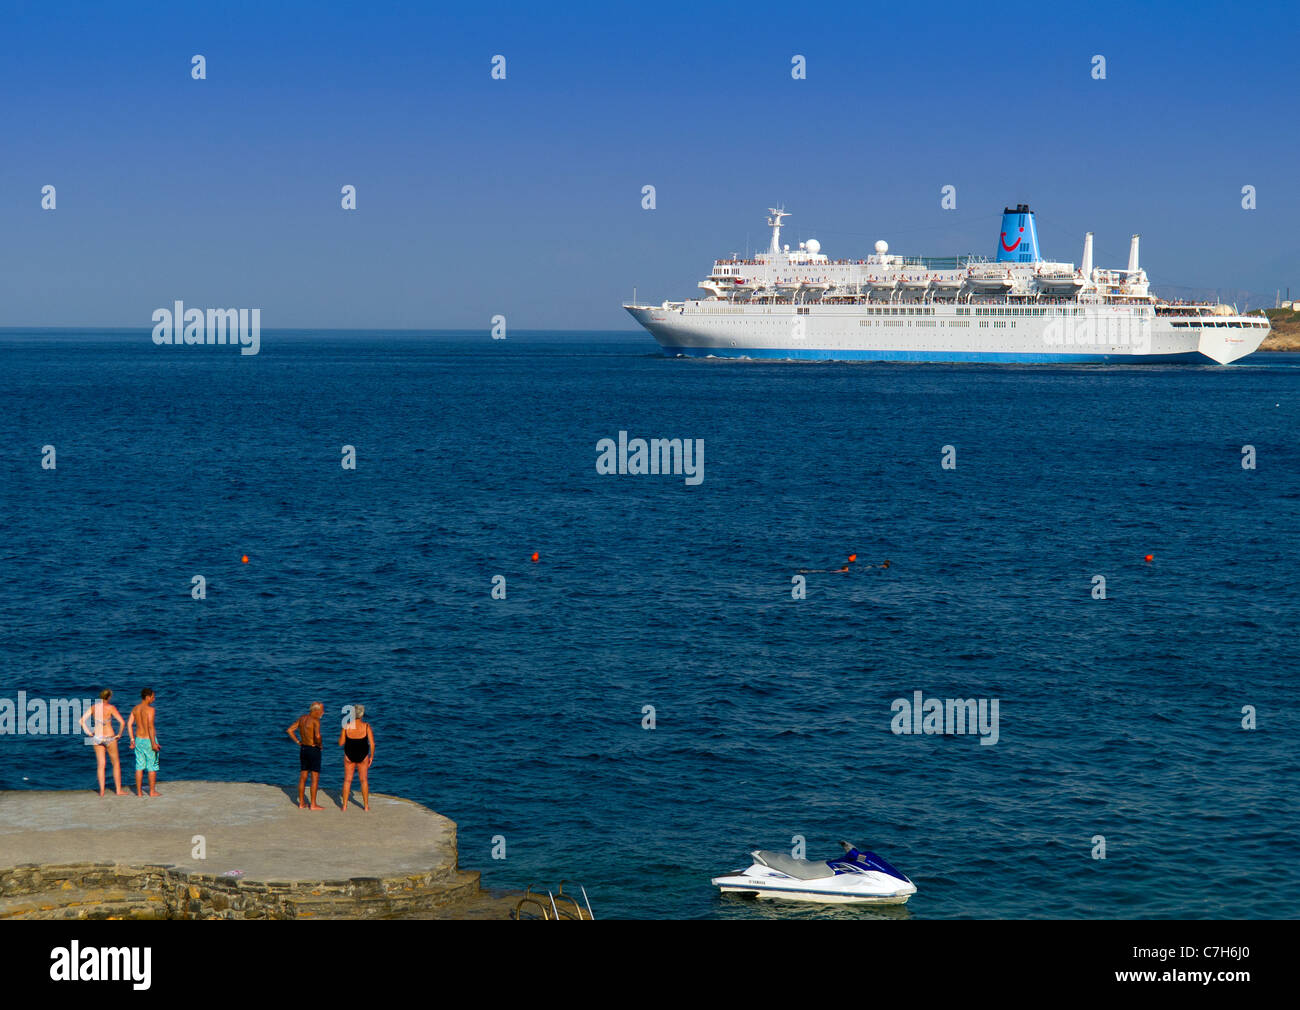 The cruise liner Thomson Spirit leaving the port of Agios Nikolaos on the Greek island of Crete watched by holiday makers. Stock Photo